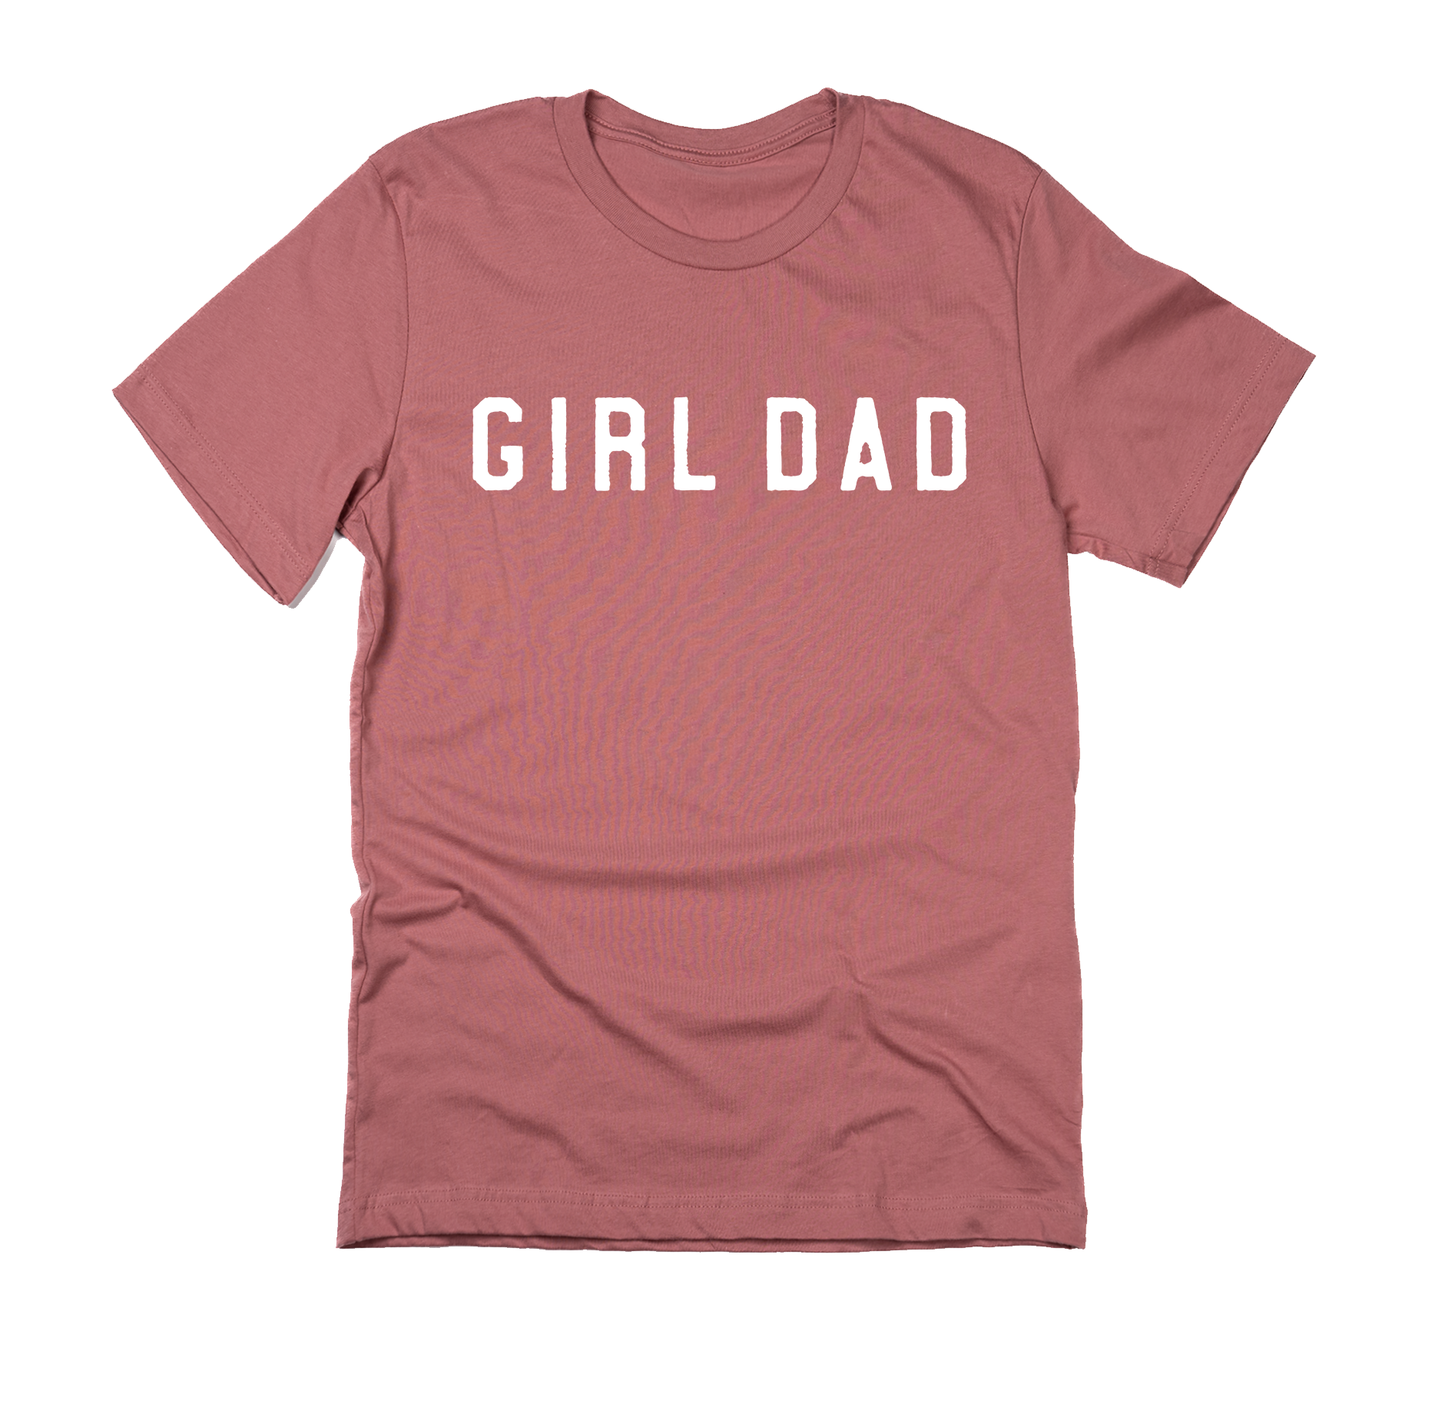 Girl Dad® (Across Front, White) - Tee (Mauve)